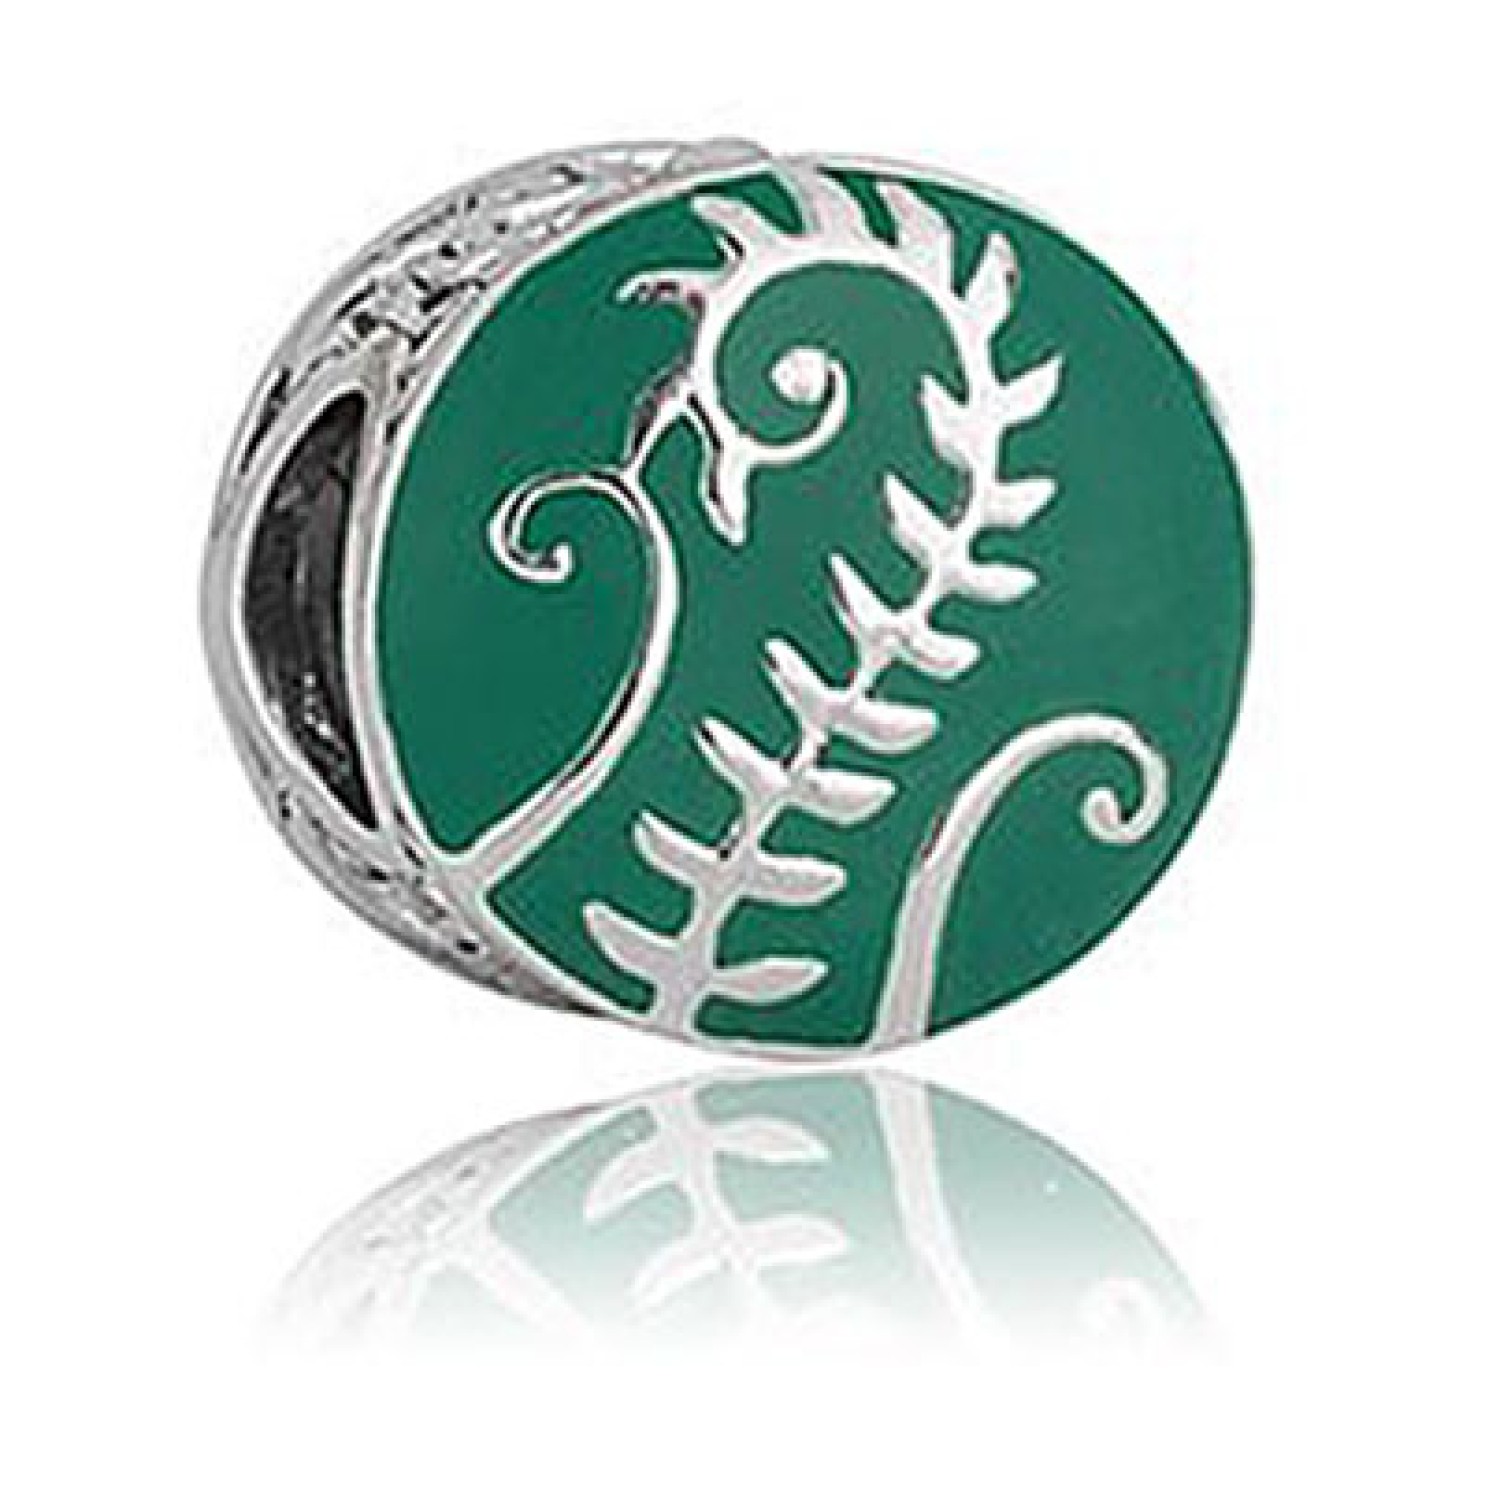 LKE045 Evolve Growth Charm NZ Native Fern. The silver fern embodies the spirit of New Zealand. Found throughout our lush green native bush, the unfurling fern frond on this charm symbolises growth. According to legend the silver fern guided the Maori peop